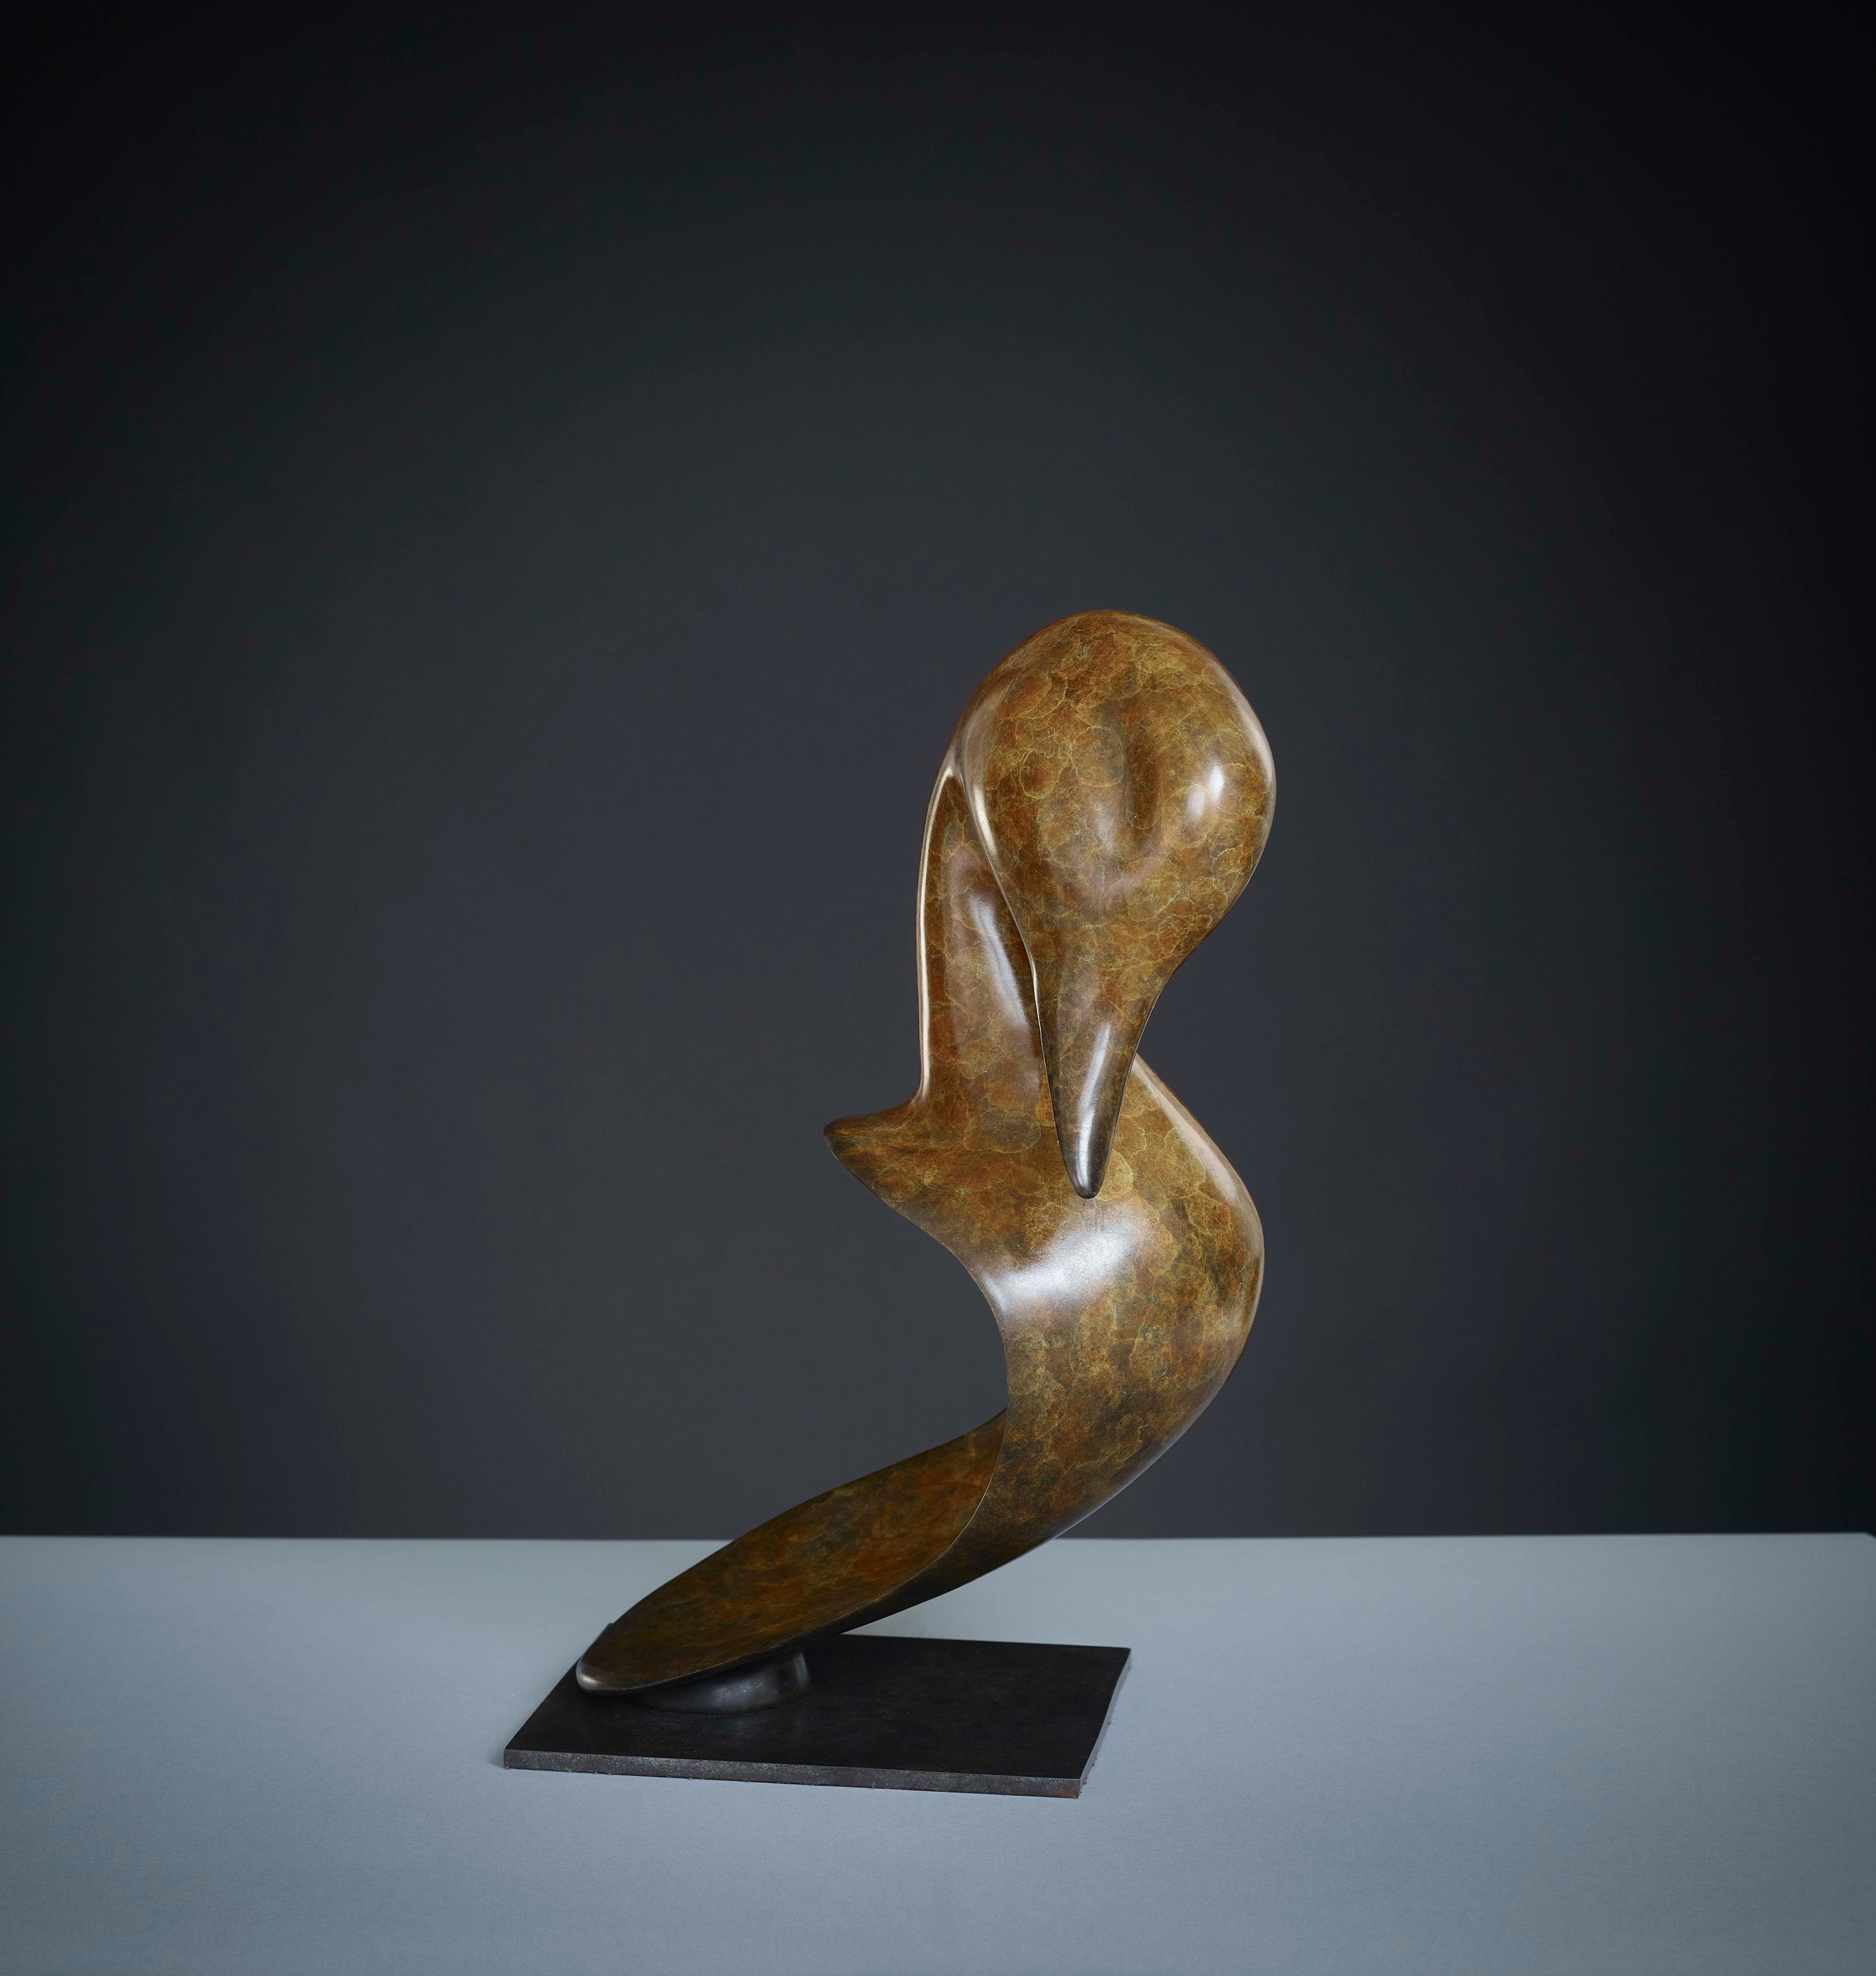 'Pintail Head' is a beautiful example of Richards work and one that would make an amazing addition to any home interior or even placed outside in nature. A bronze that is elegant and stunning!

Richard J. Smith was born in Luton, Bedfordshire, UK in